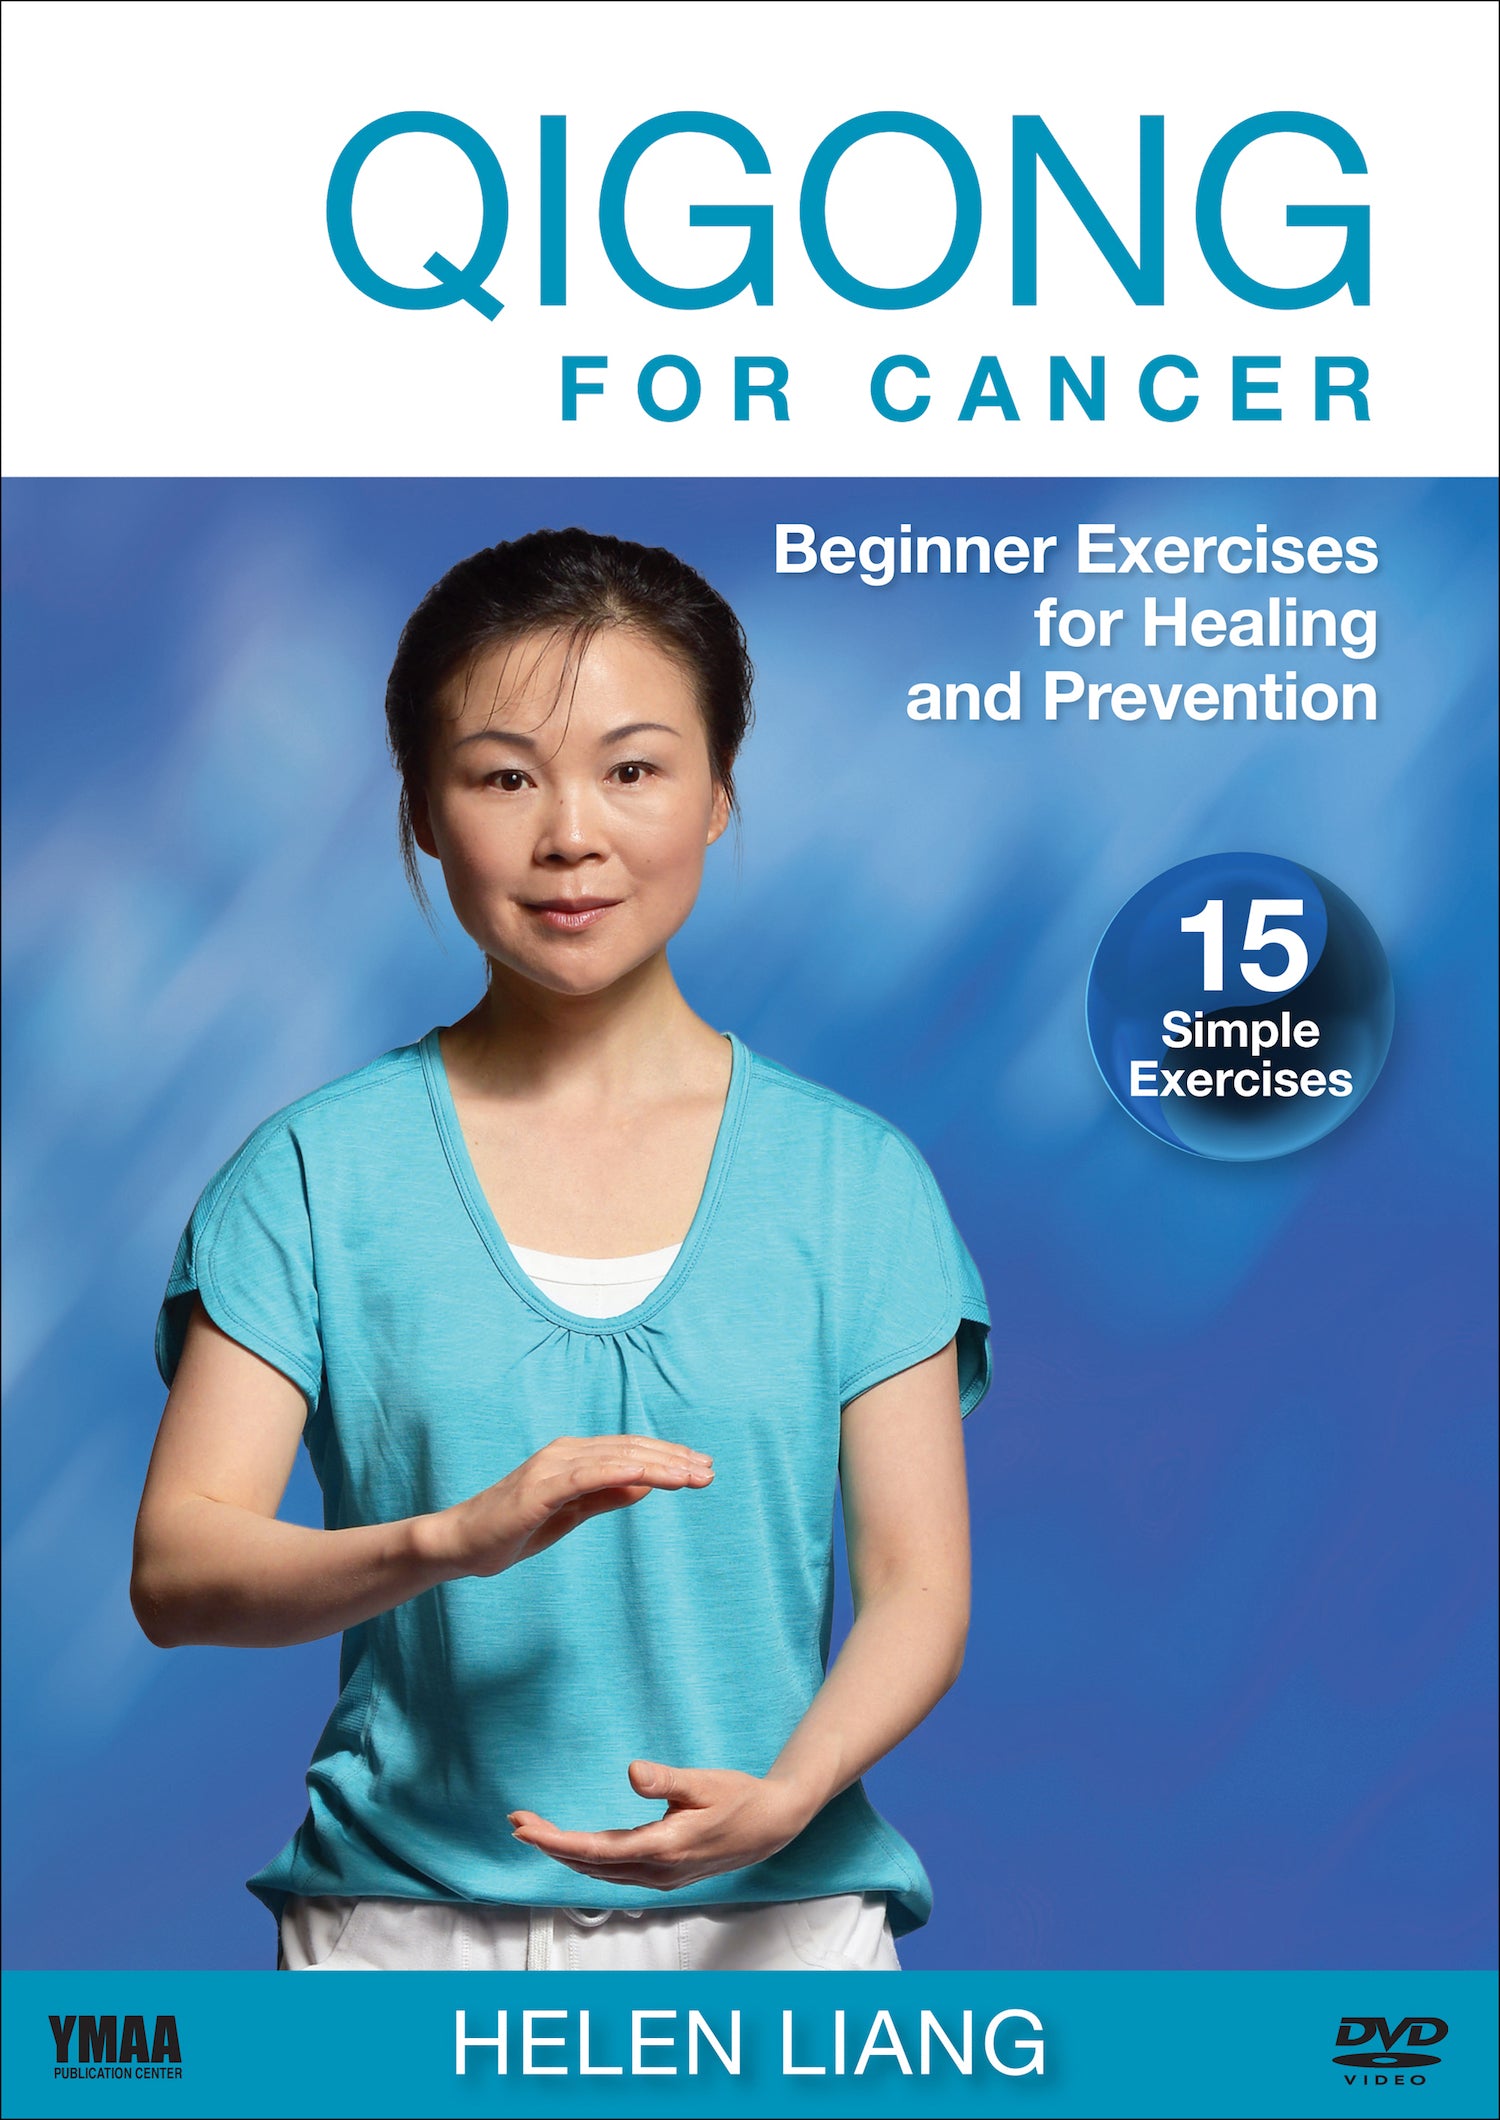 Qigong for Cancer DVD By Helen Liang - Budovideos Inc